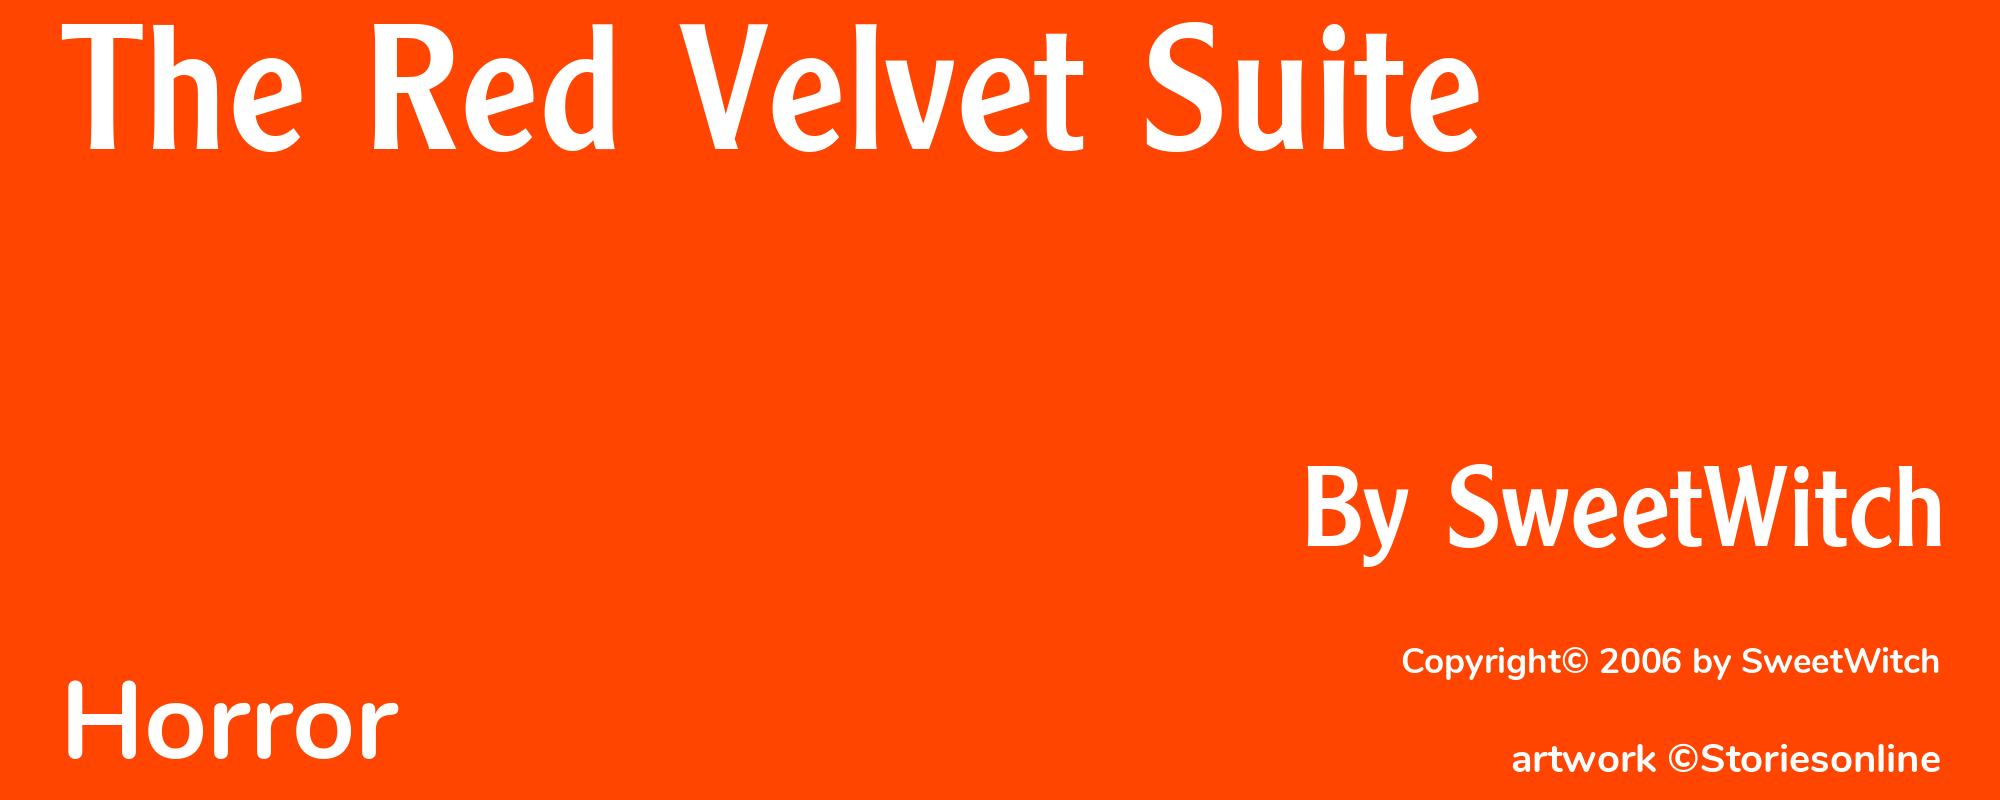 The Red Velvet Suite - Cover